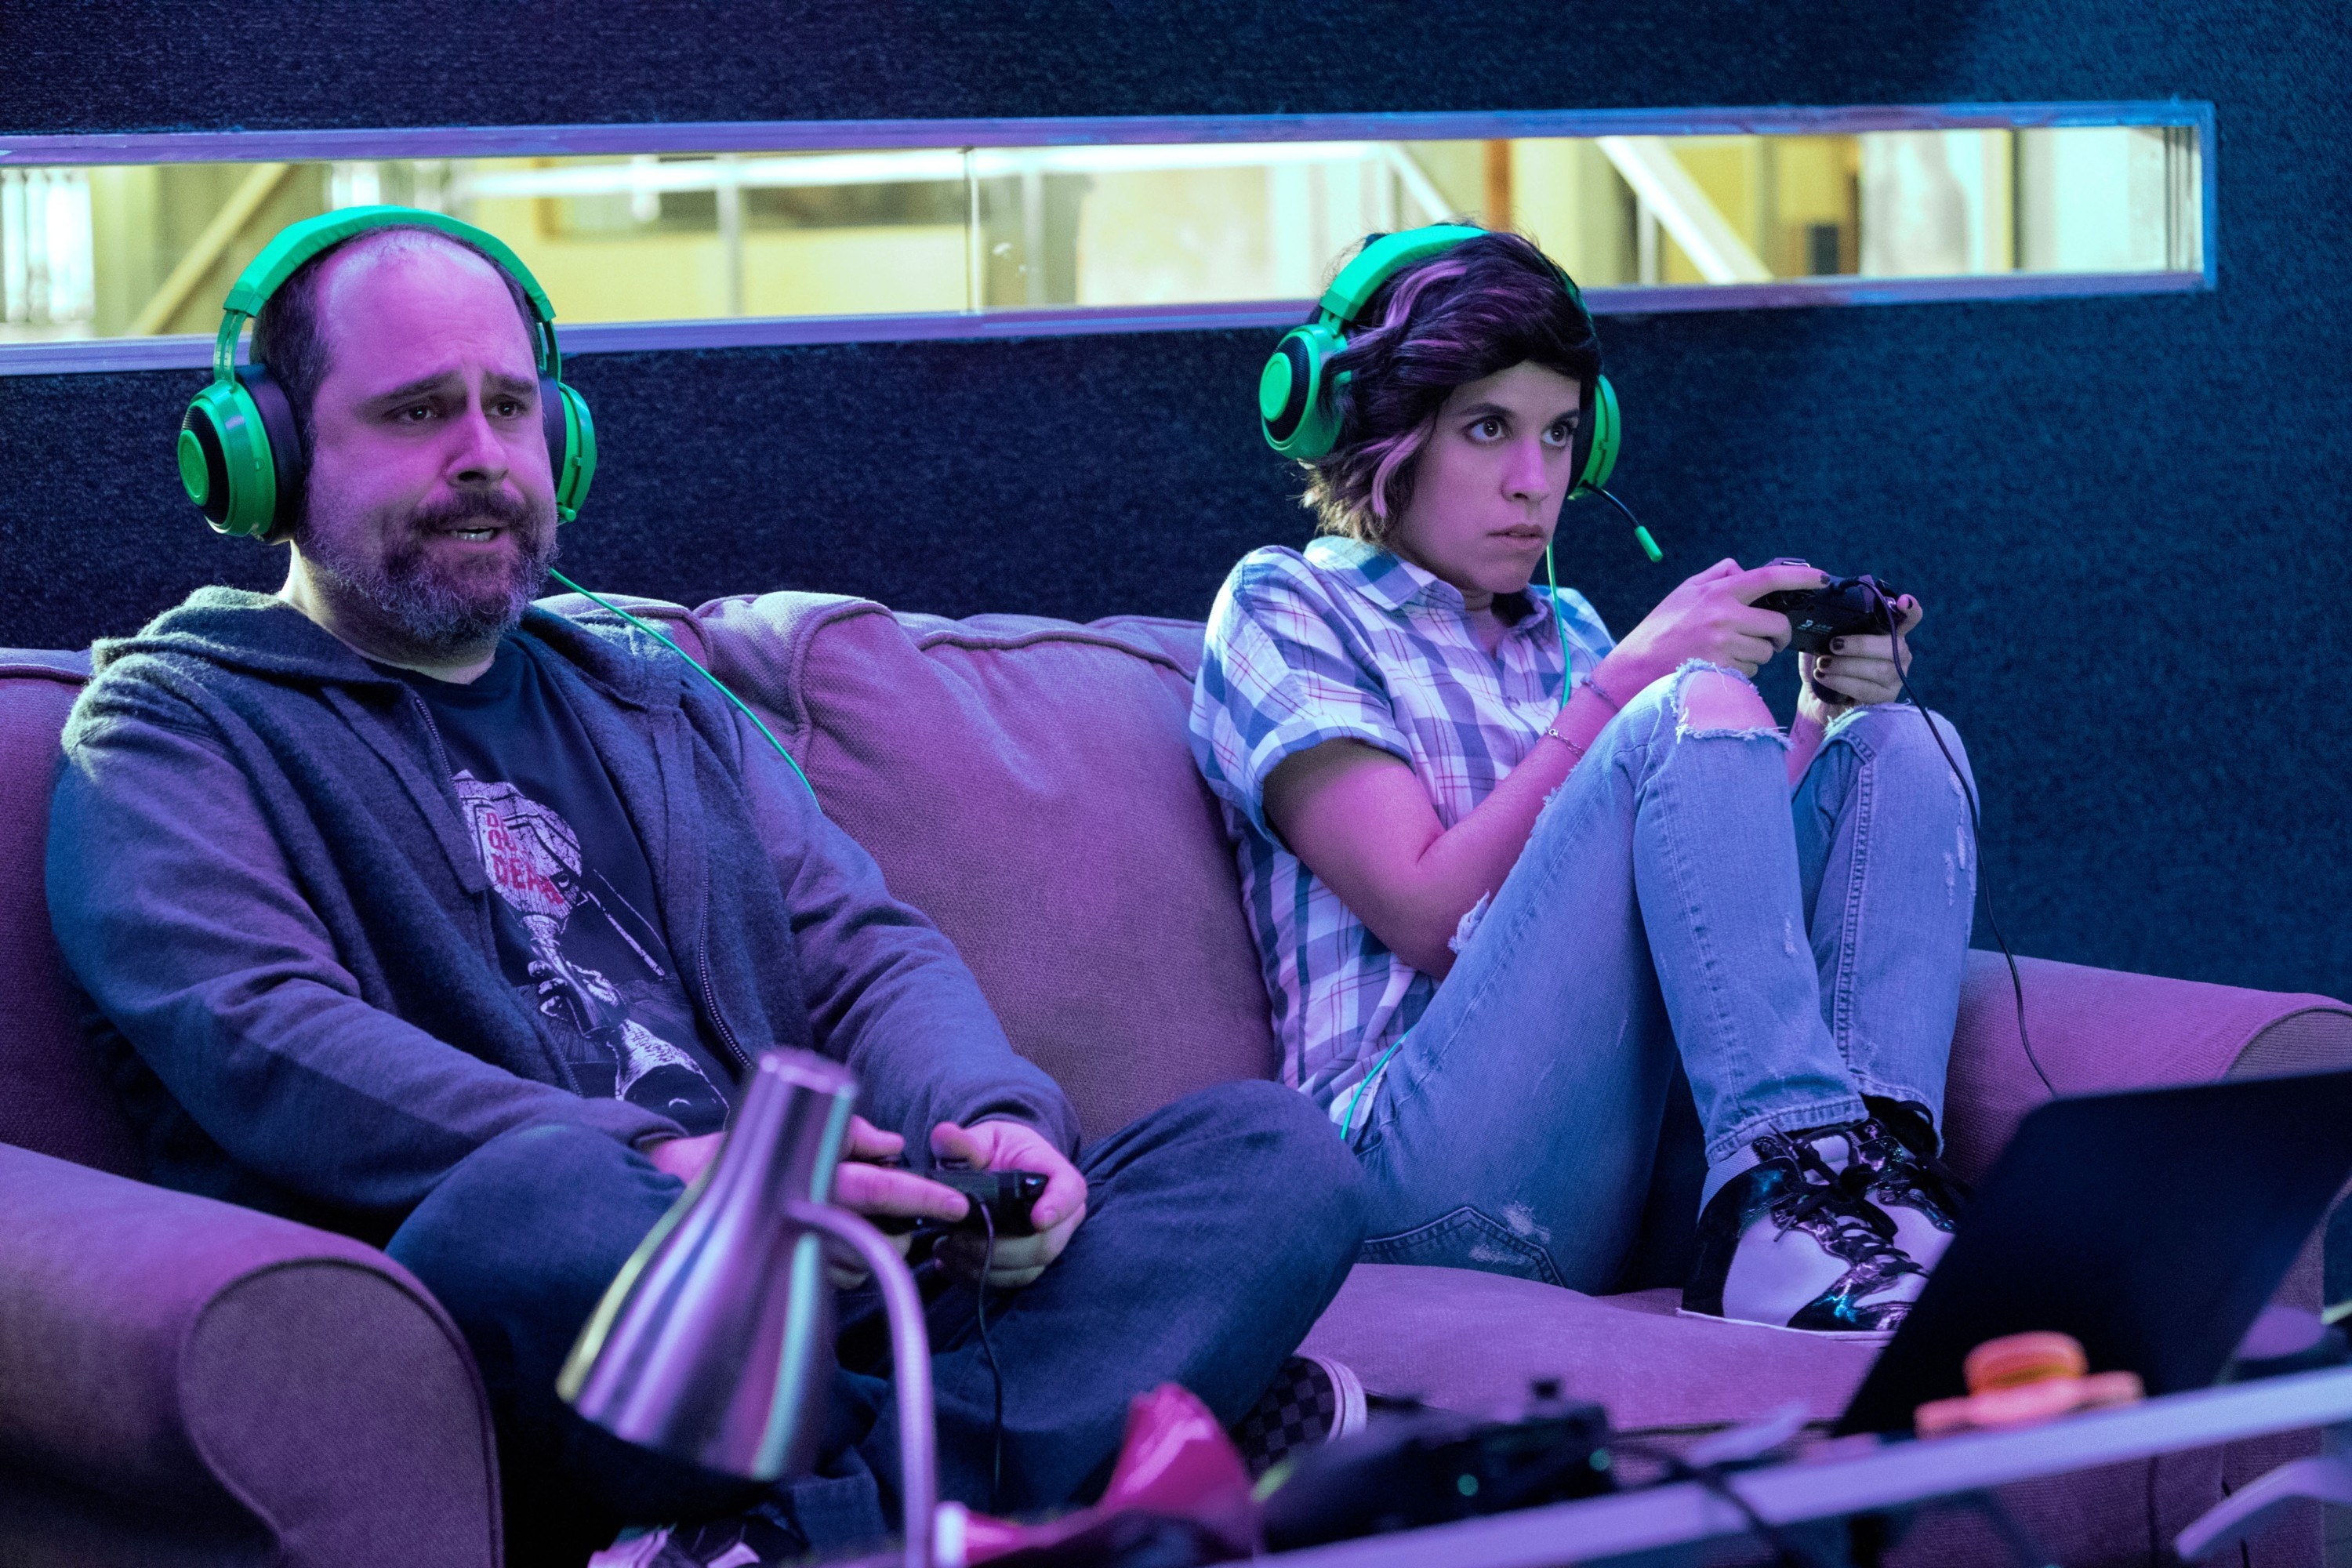 A man and woman playing a video game